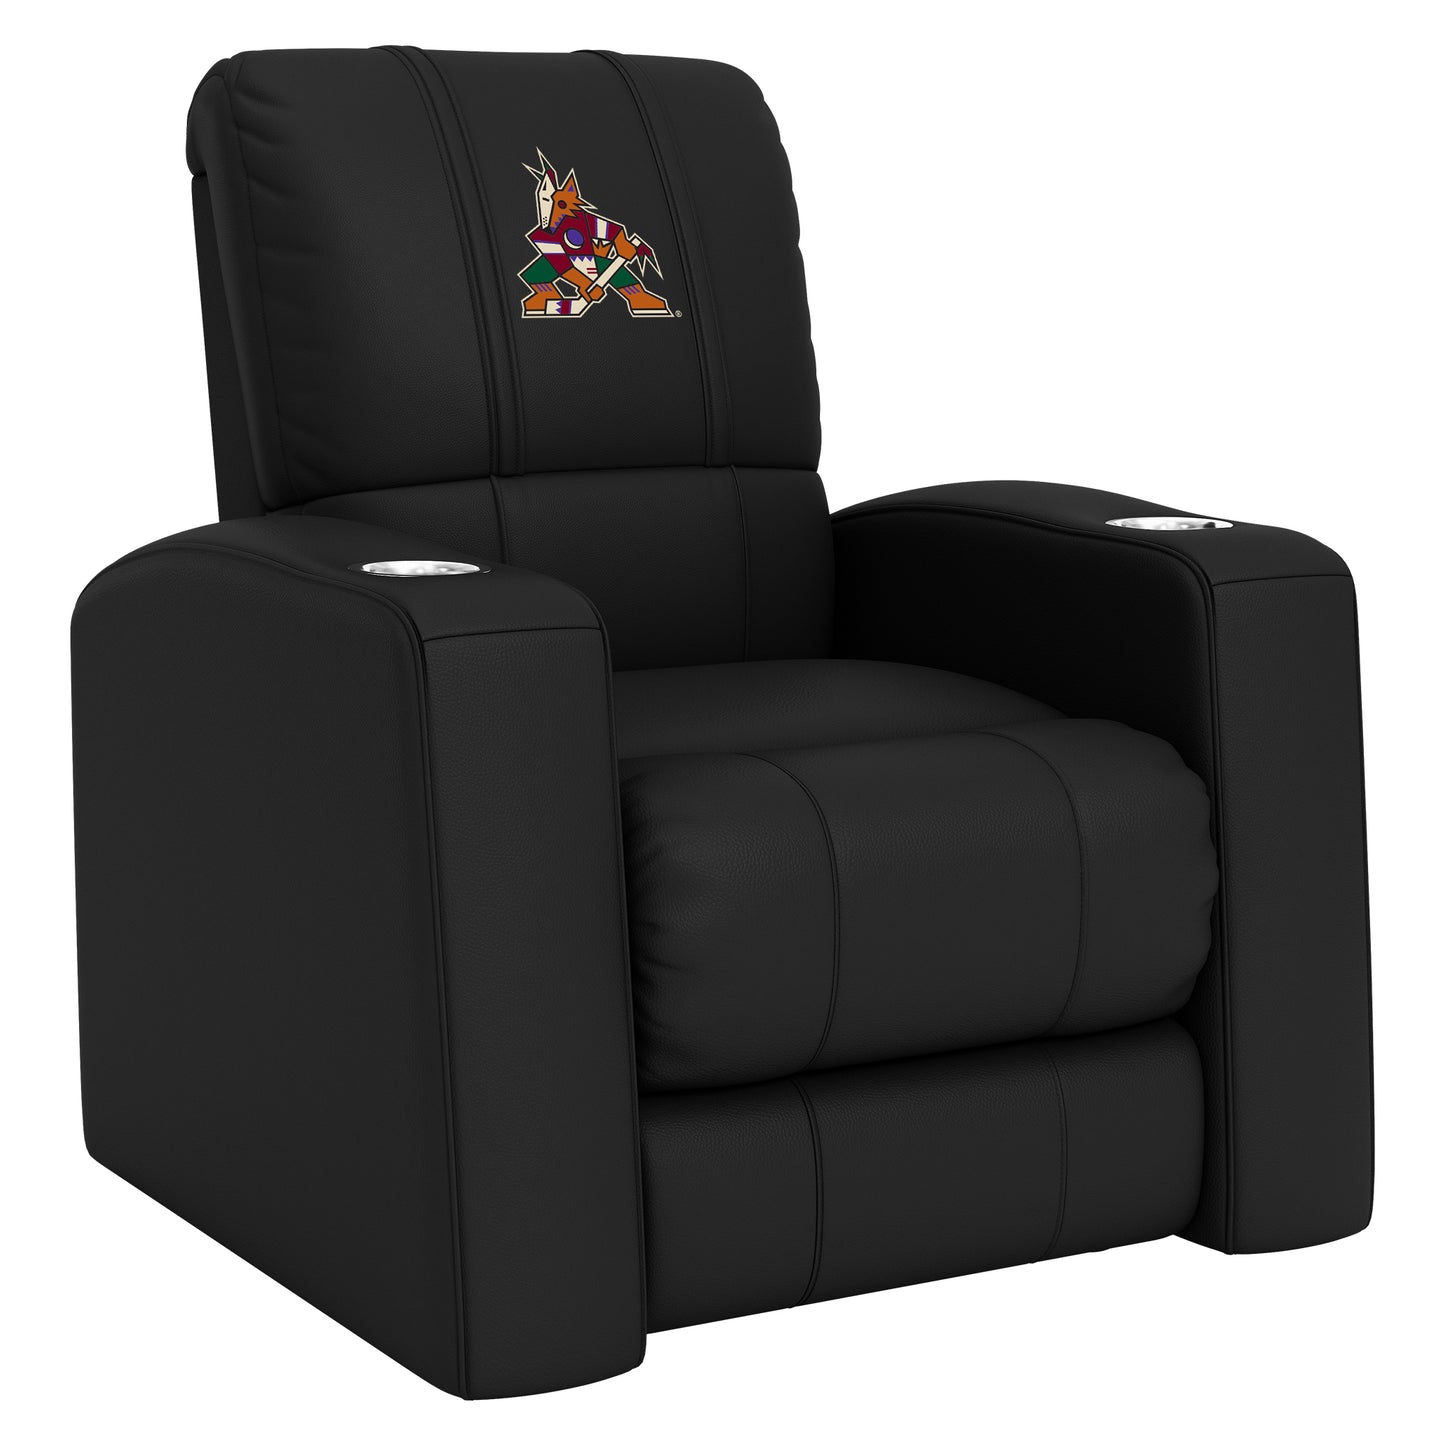 Relax Home Theater Recliner with Arizona Coyotes Primary Logo